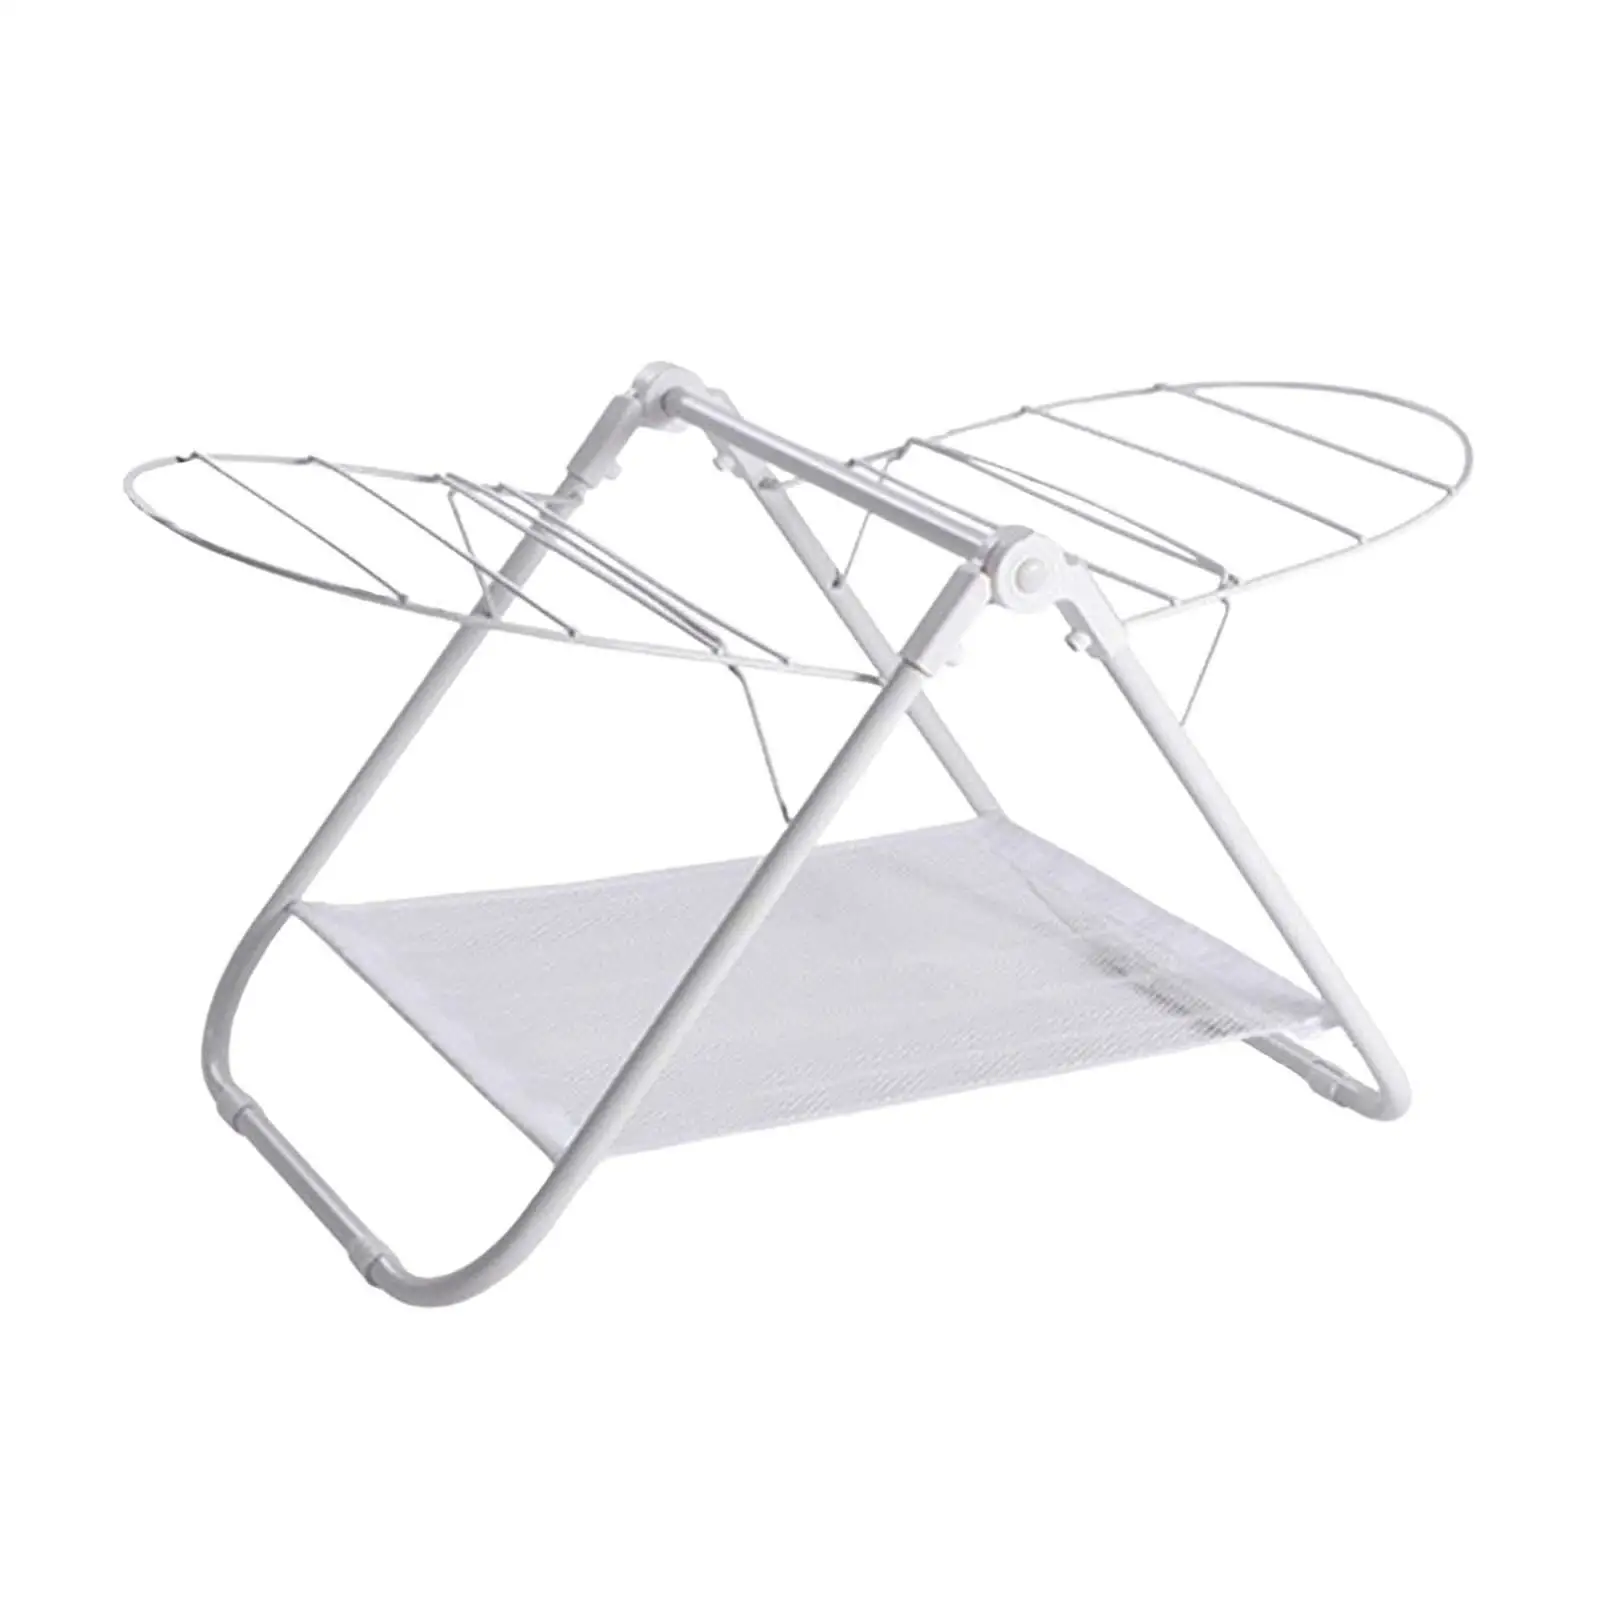 Foldable Laundry Rack Floor Type Large Strong Bearing Capacity Laundry Garment Dryer Stand Mobile Clothes Airer for Home Clothes